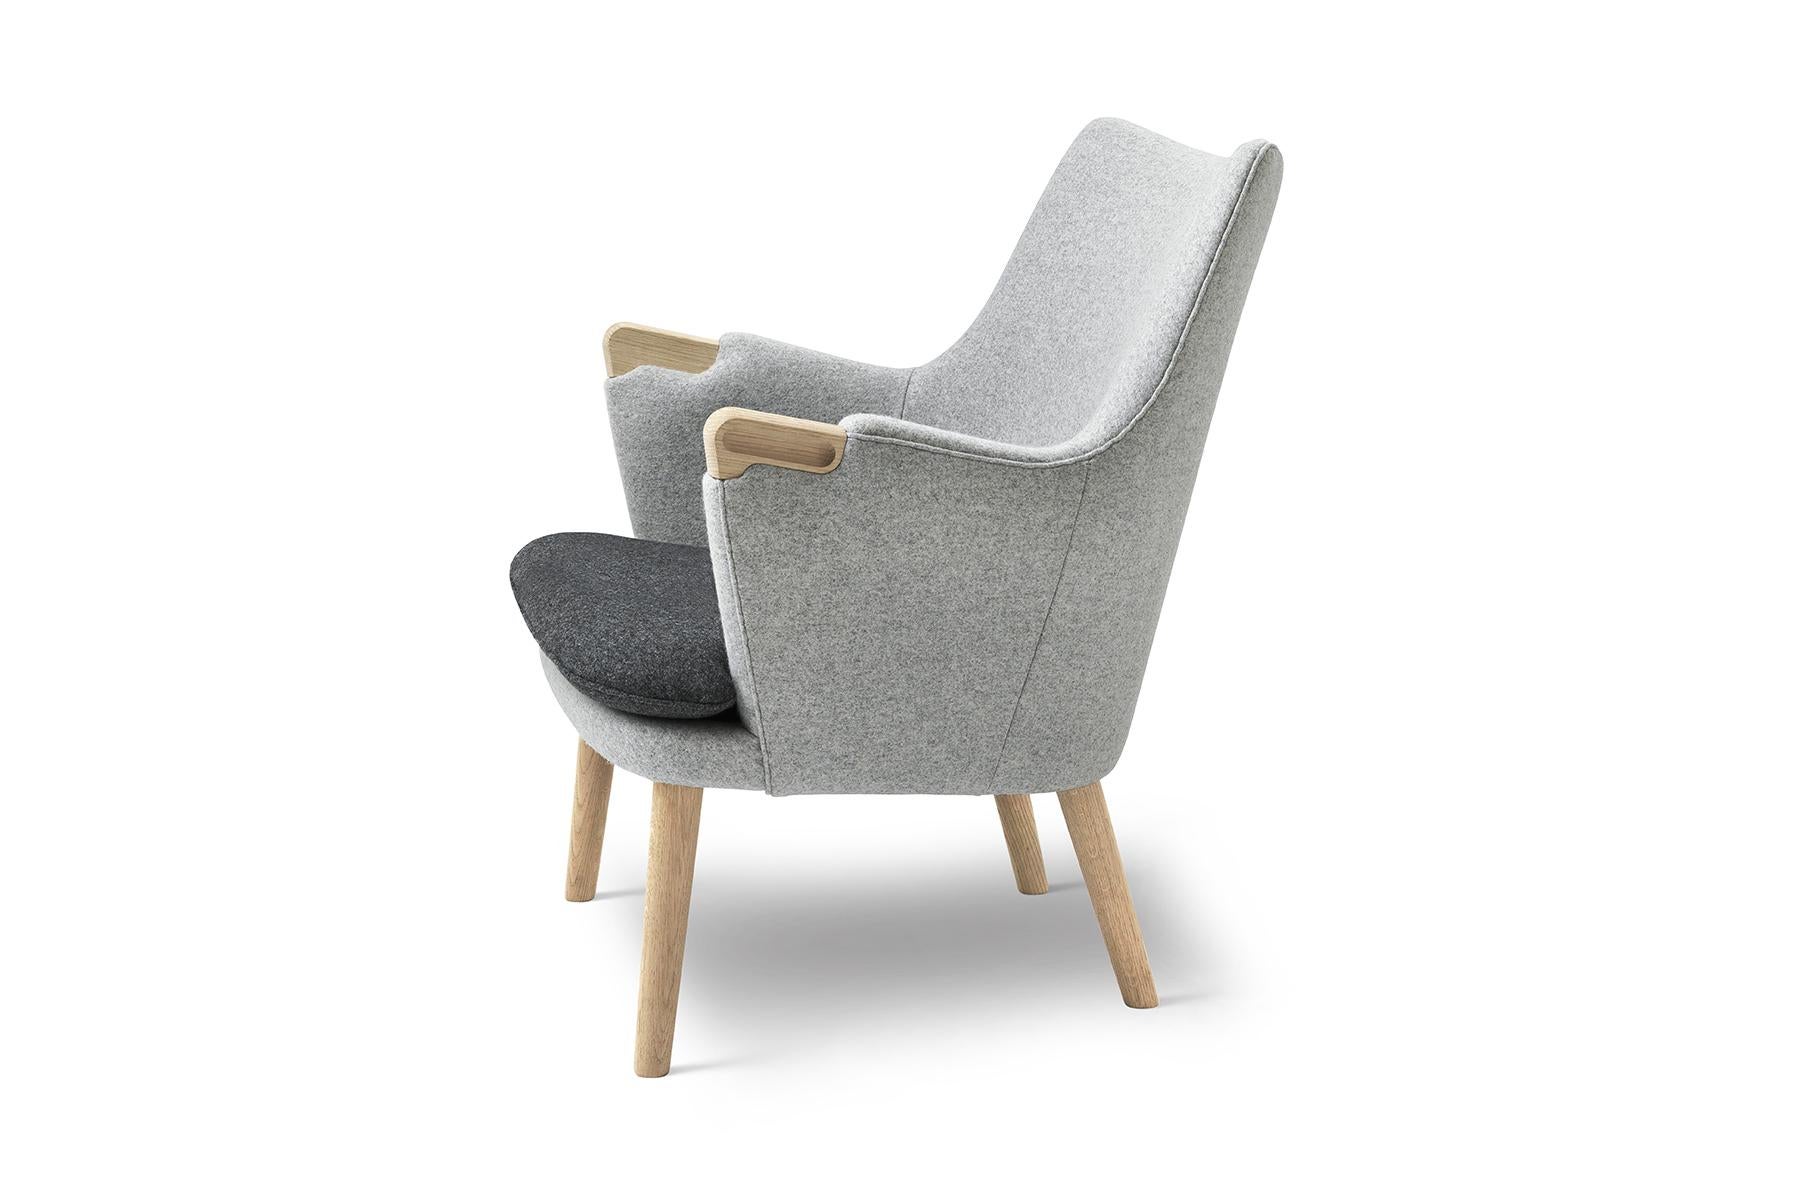 Created in 1952 by pioneering Danish designer Hans J. Wegner, the masterfully designed CH71 lounge chair is perfectly proportioned to be both elegantly compact and supremely comfortable.
  